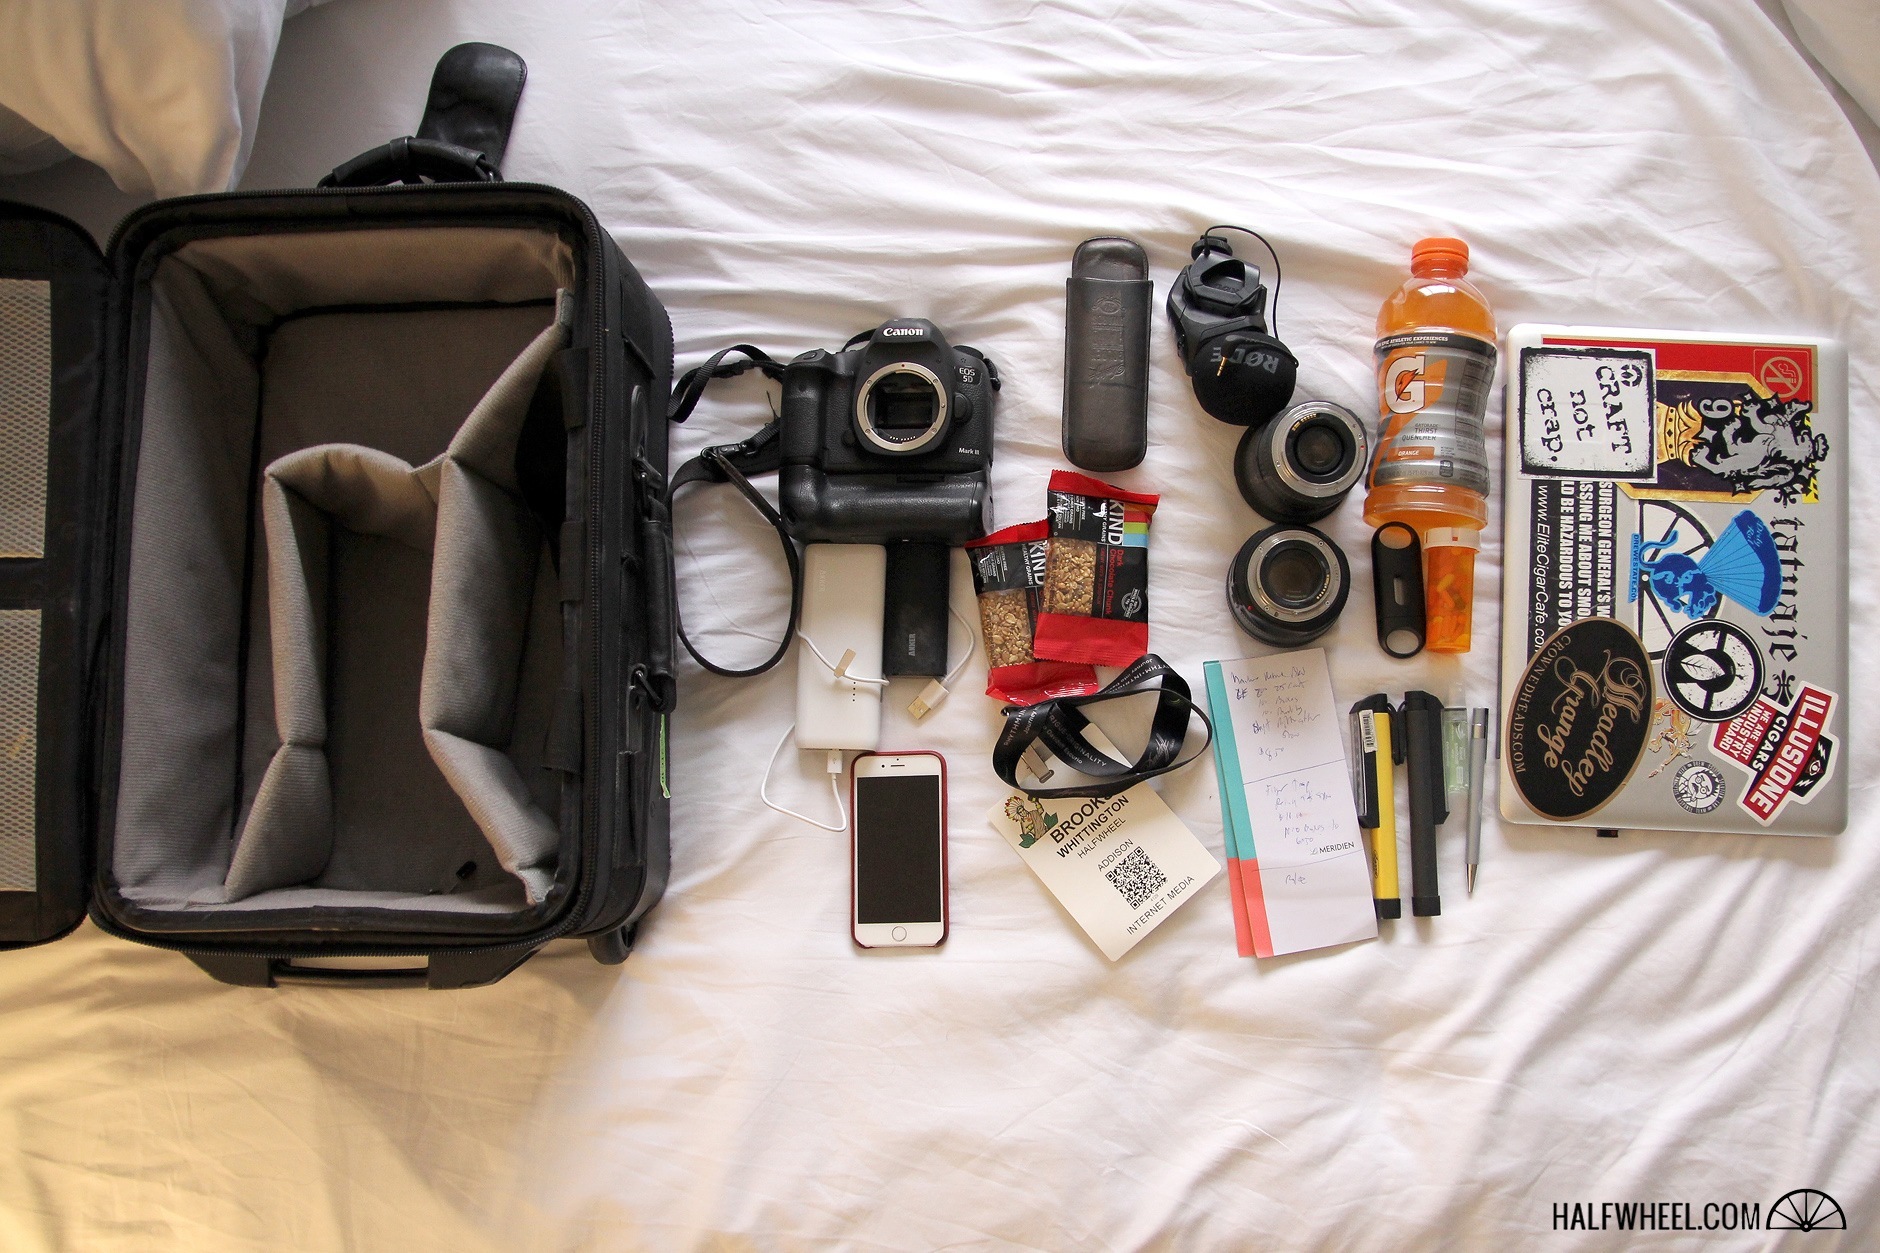 Brooks Whats In My Bag (deleted bace1a3c011403f743a039df6223e735)